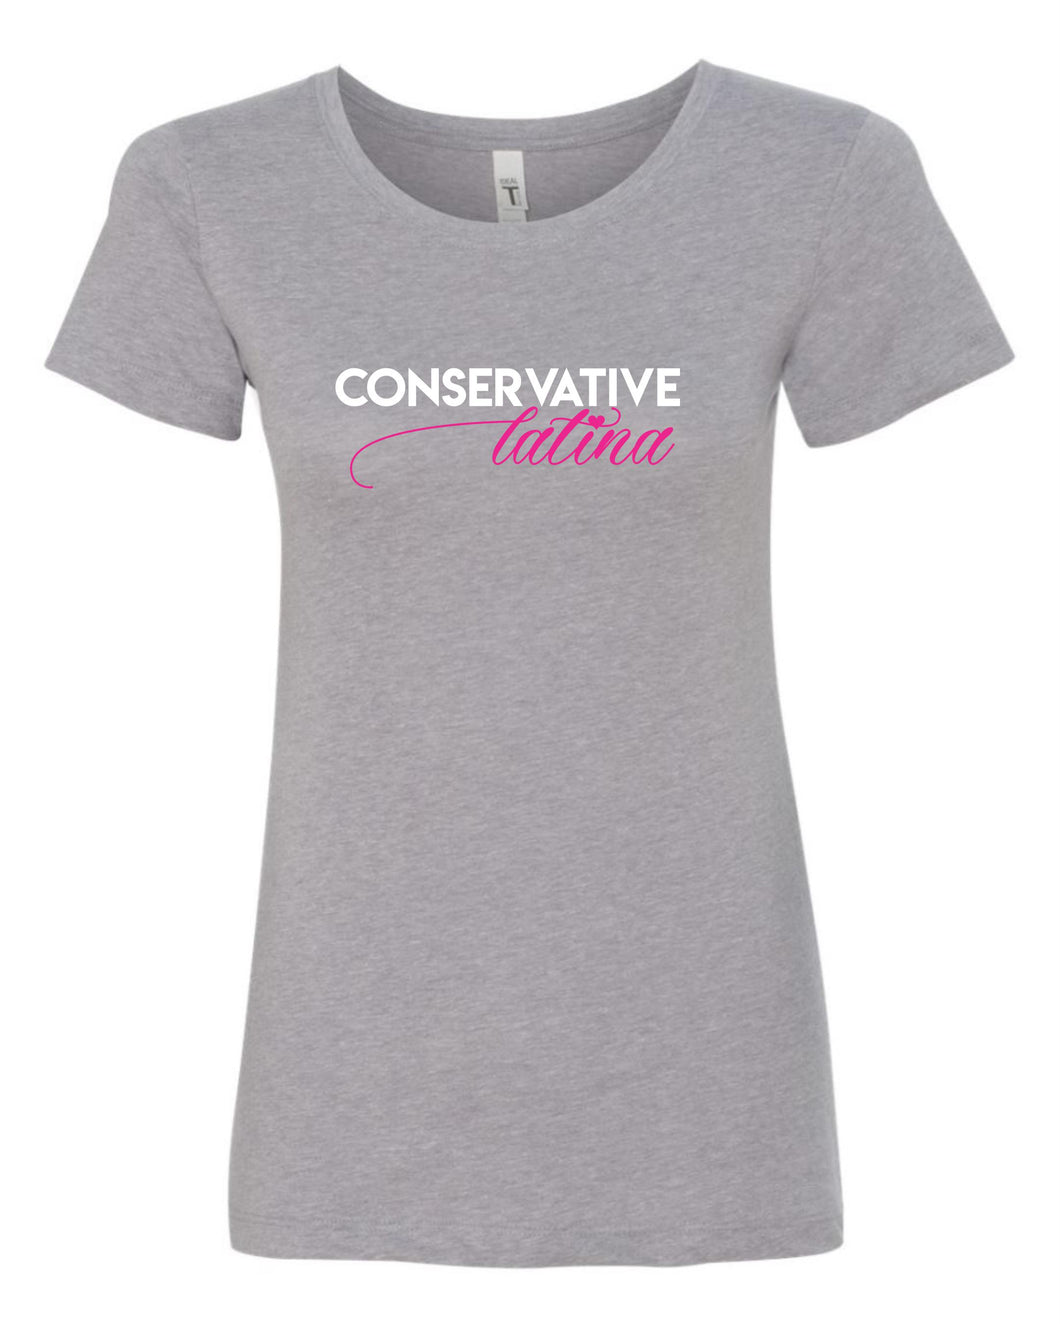 LX-02 Conservative Latina Fitted Ideal Tee Shirt Cotton Blend